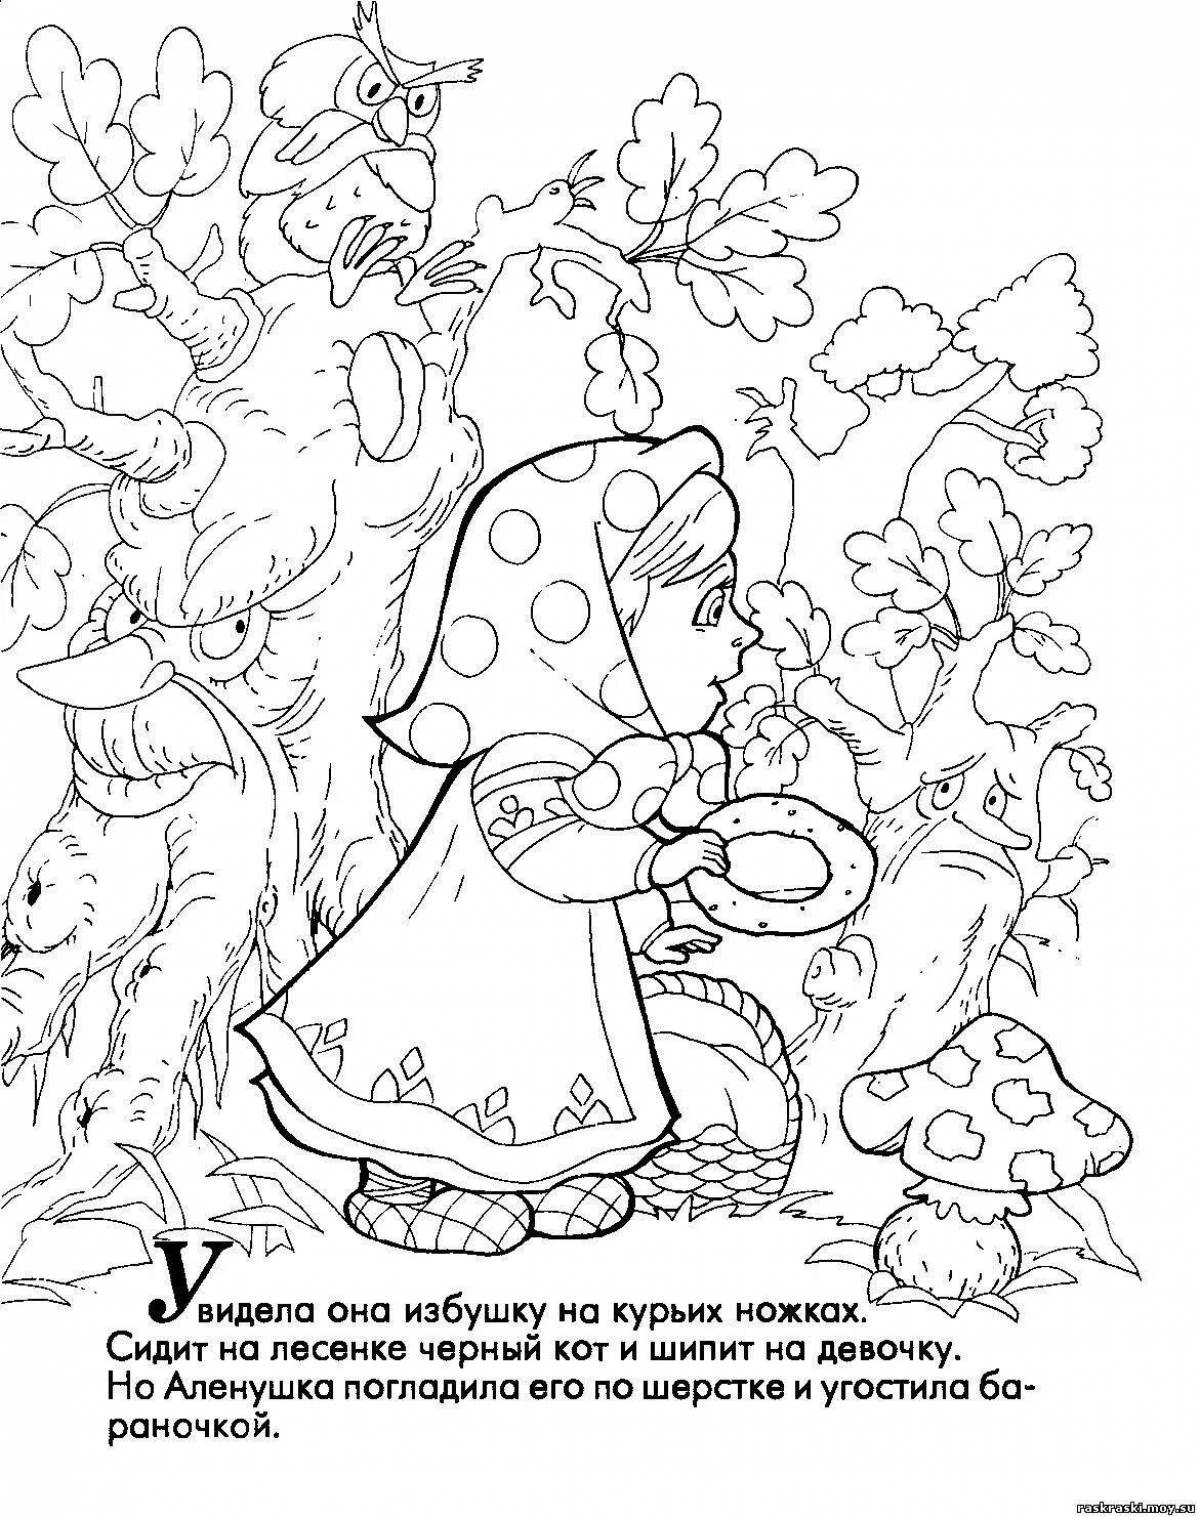 Exquisite coloring book based on fairy tales for children Russian folk